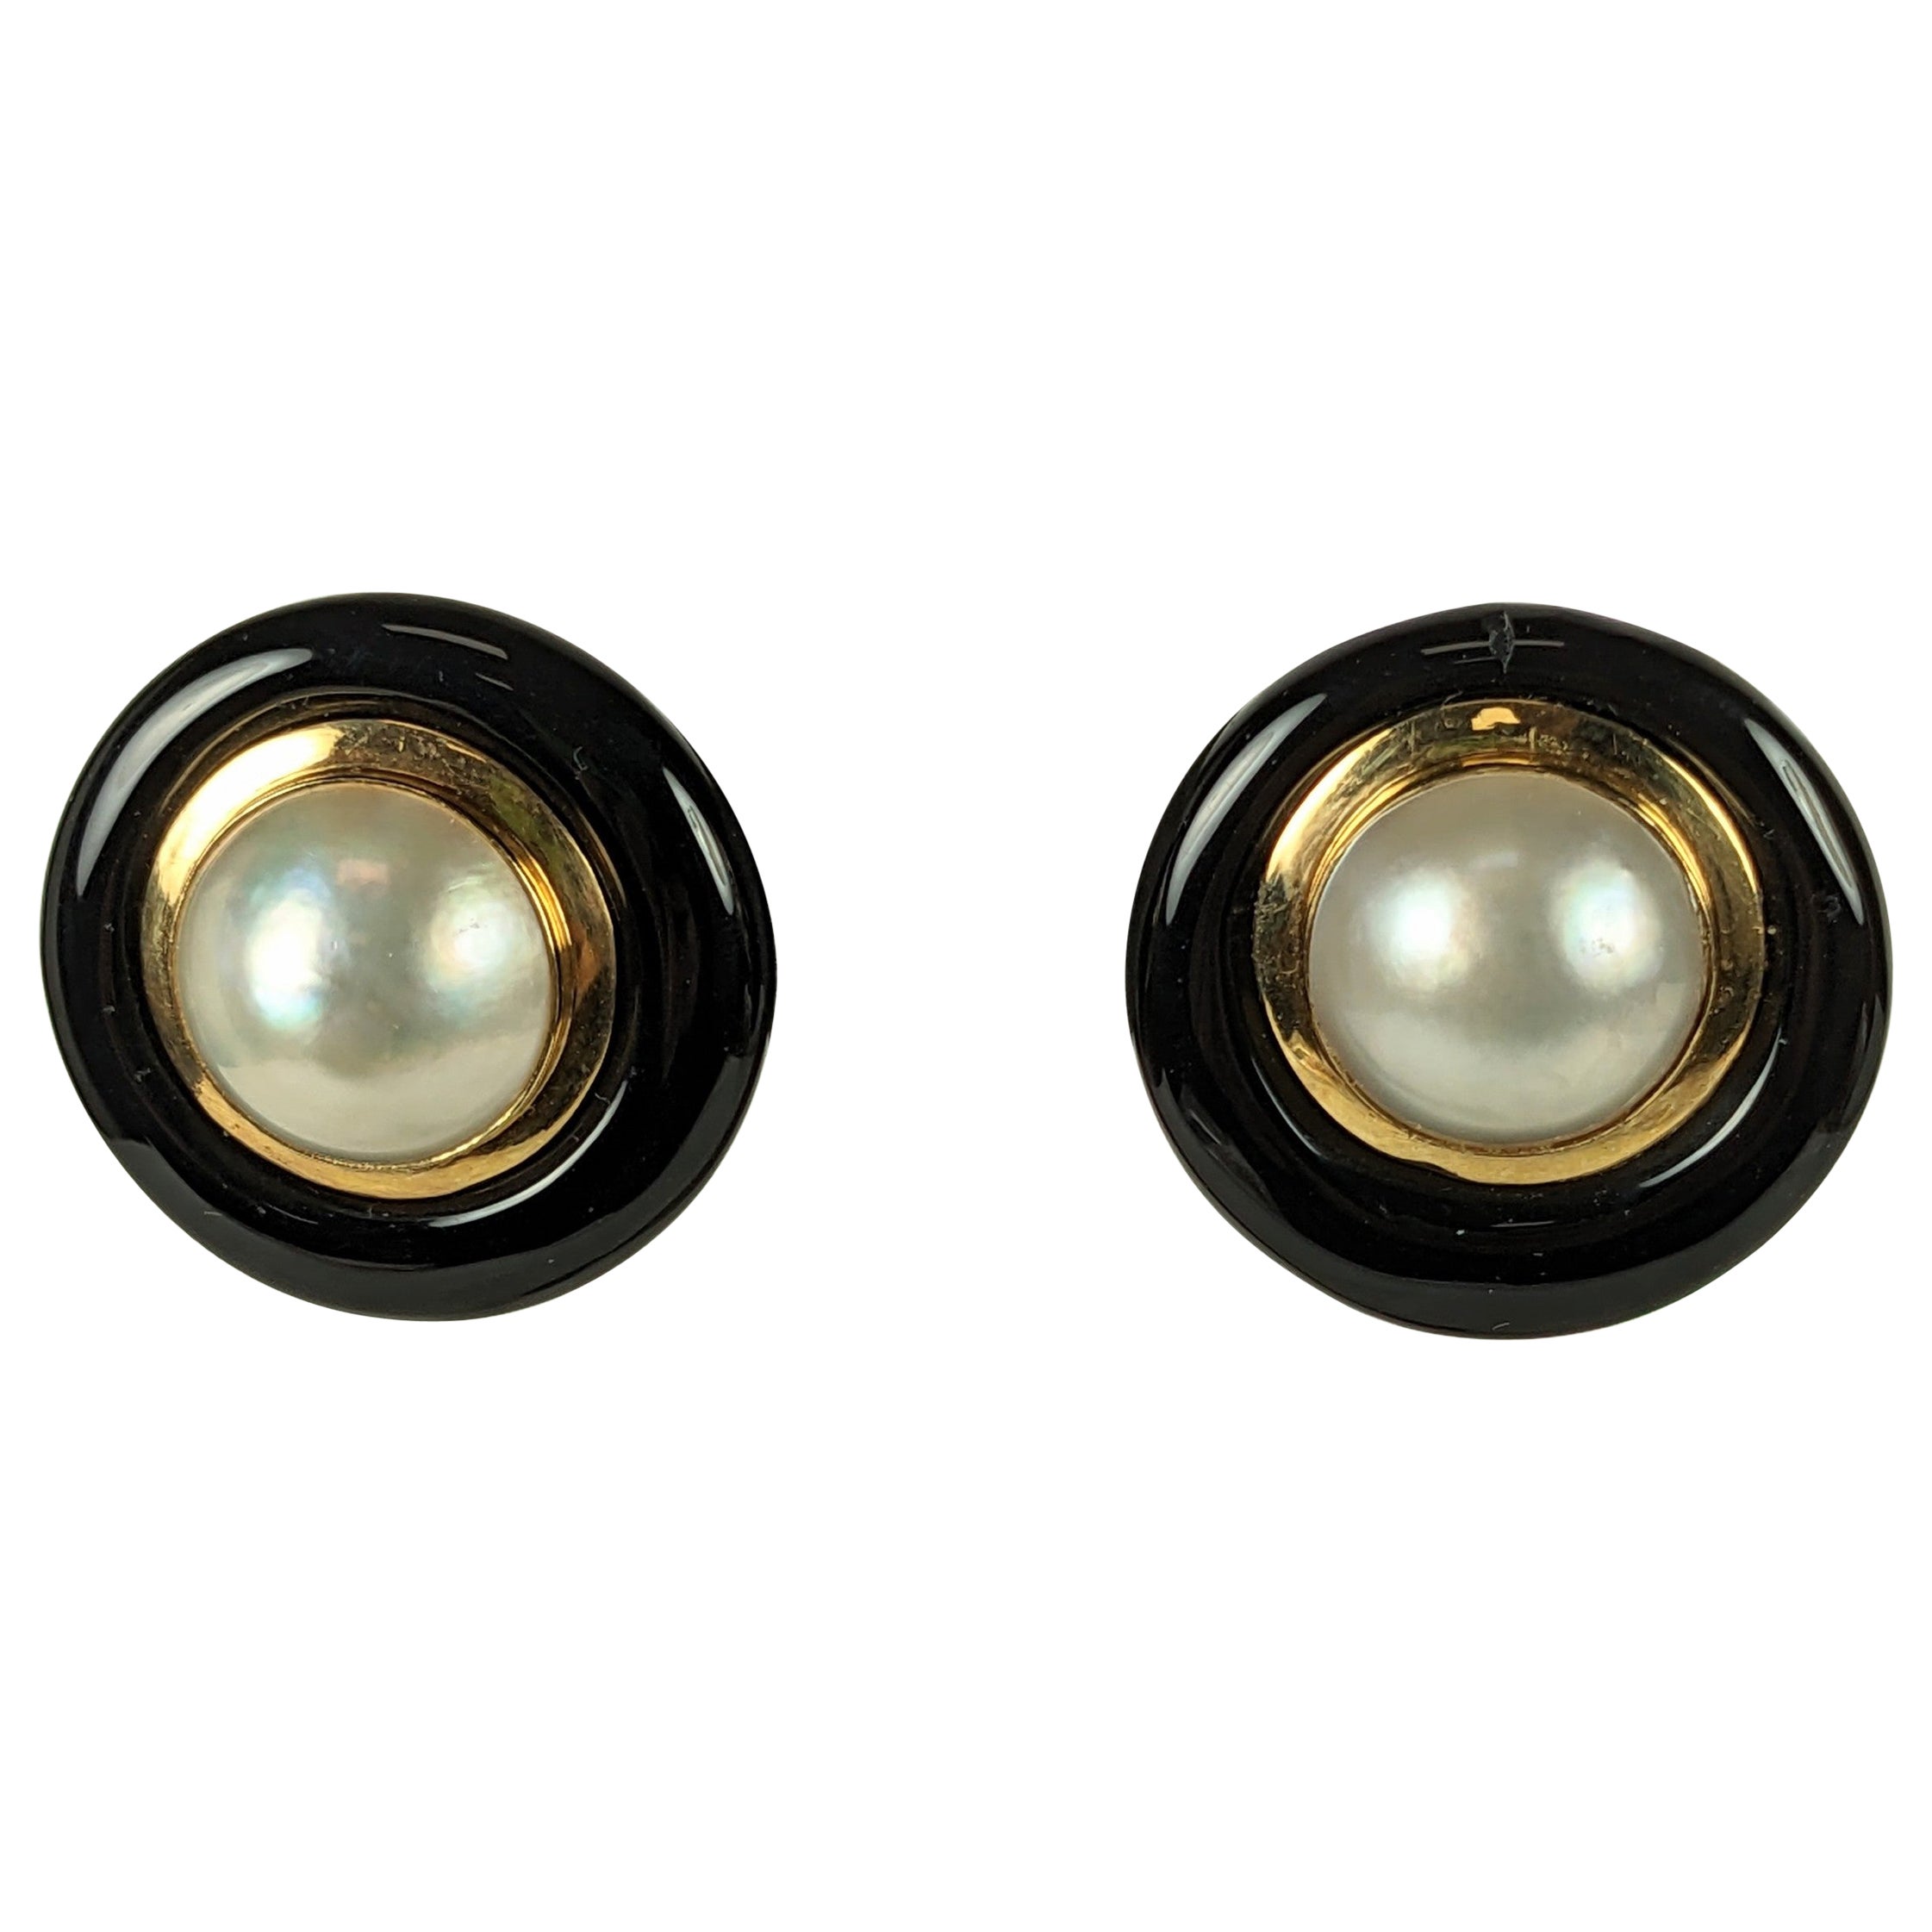 Maz Mabe Pearl and Onyx Earrings